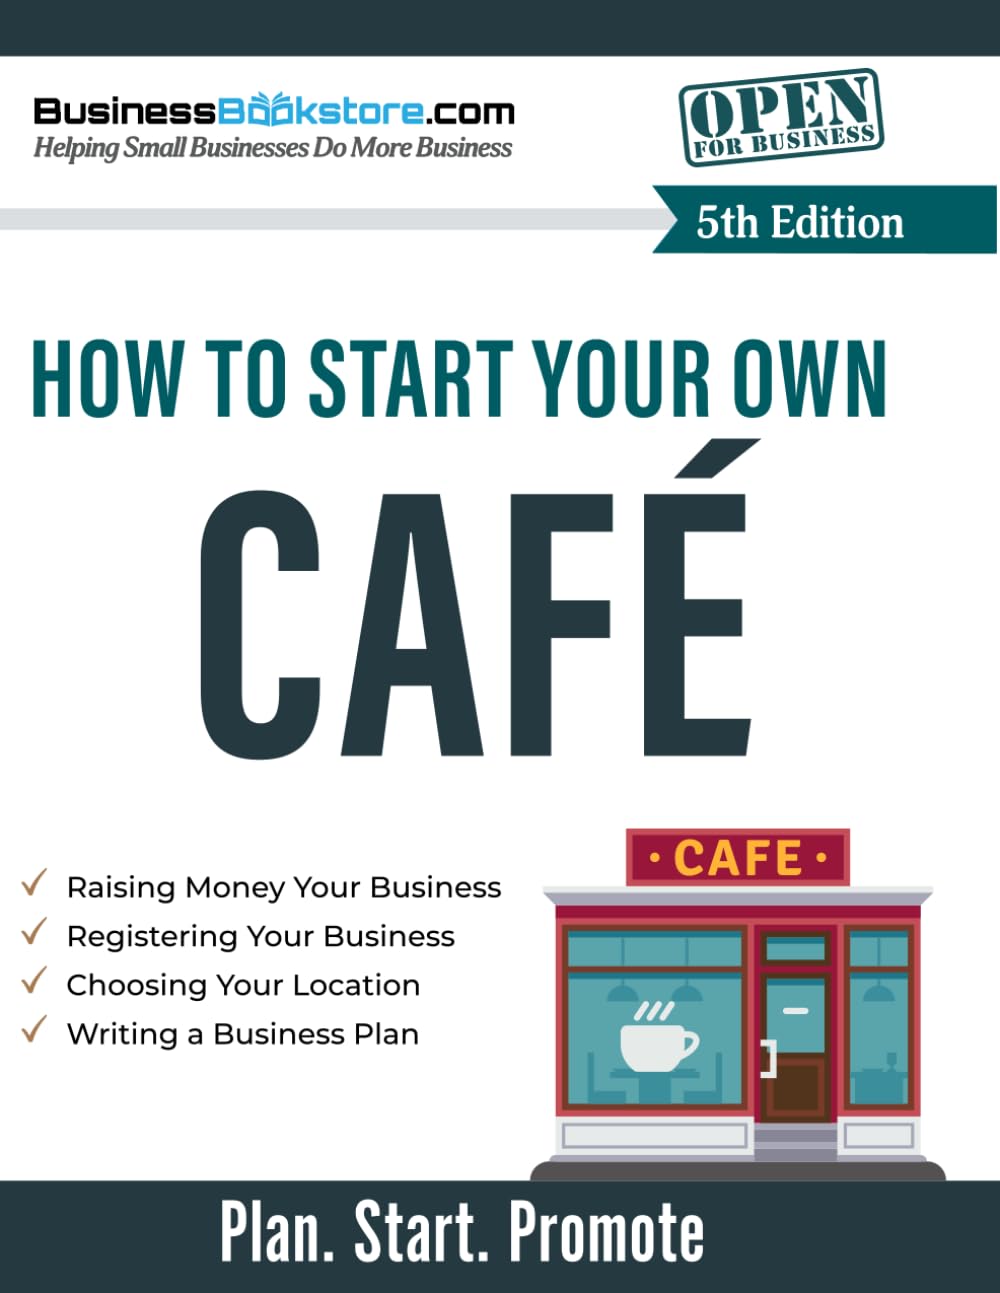 How to Start Your Own Cafe